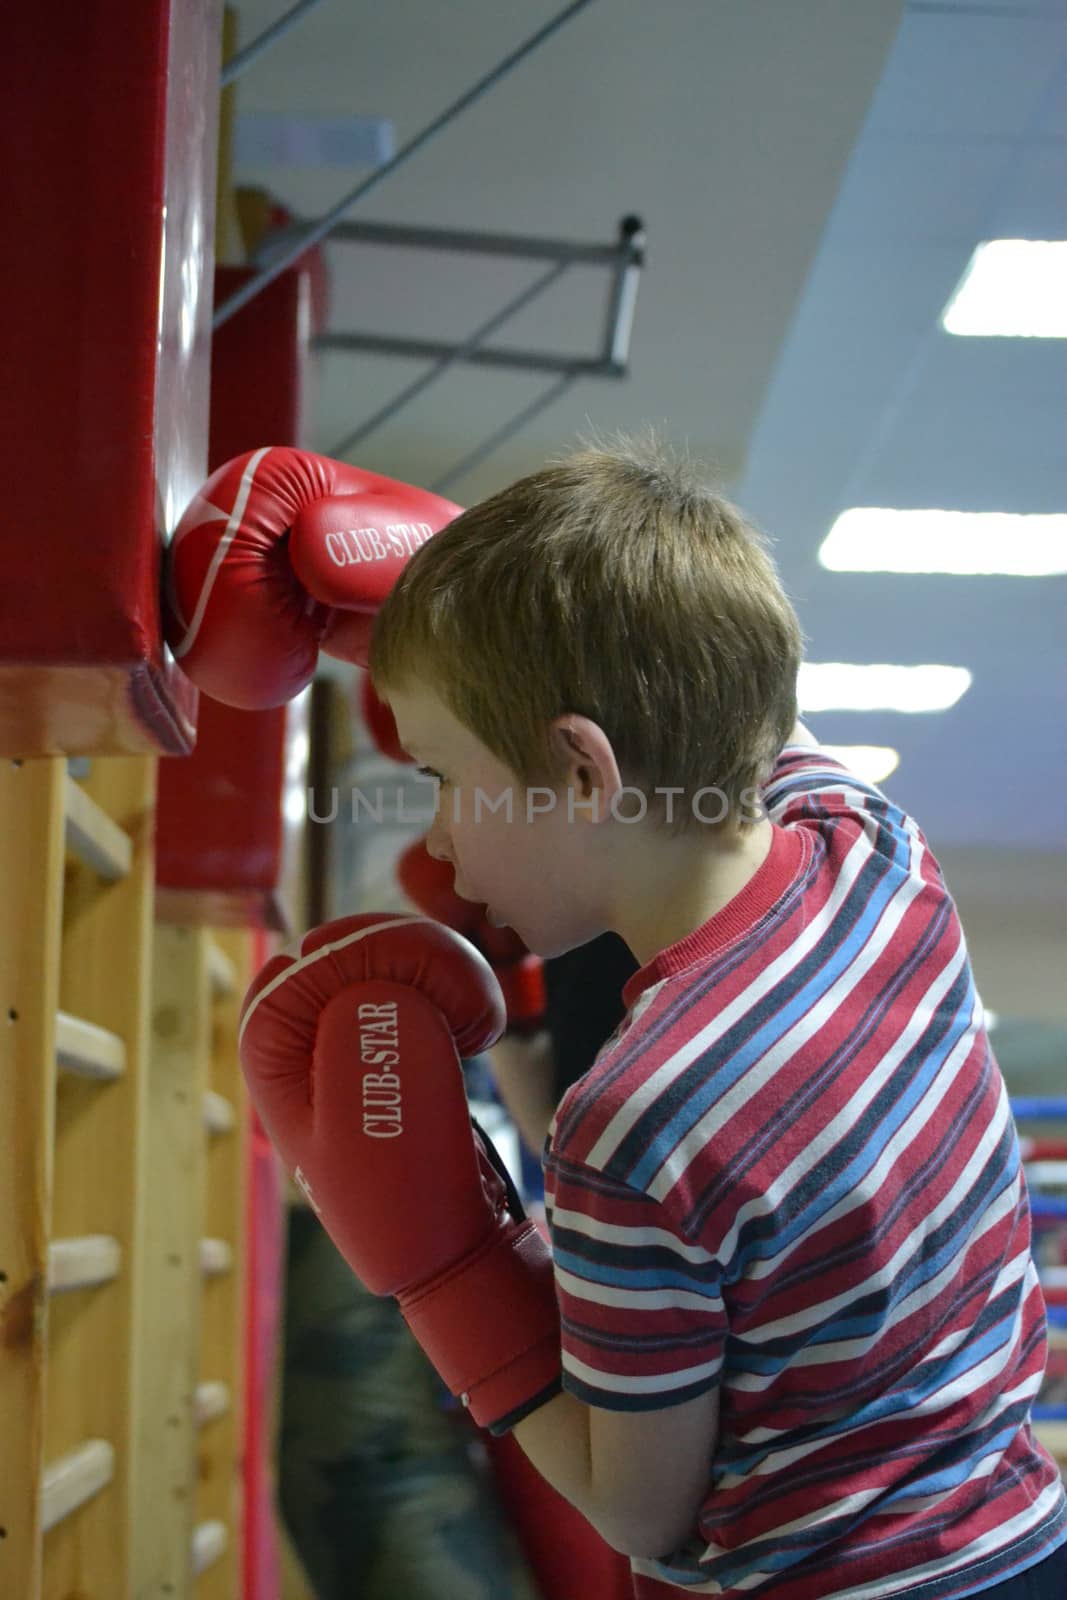 The boy at boxing competitions